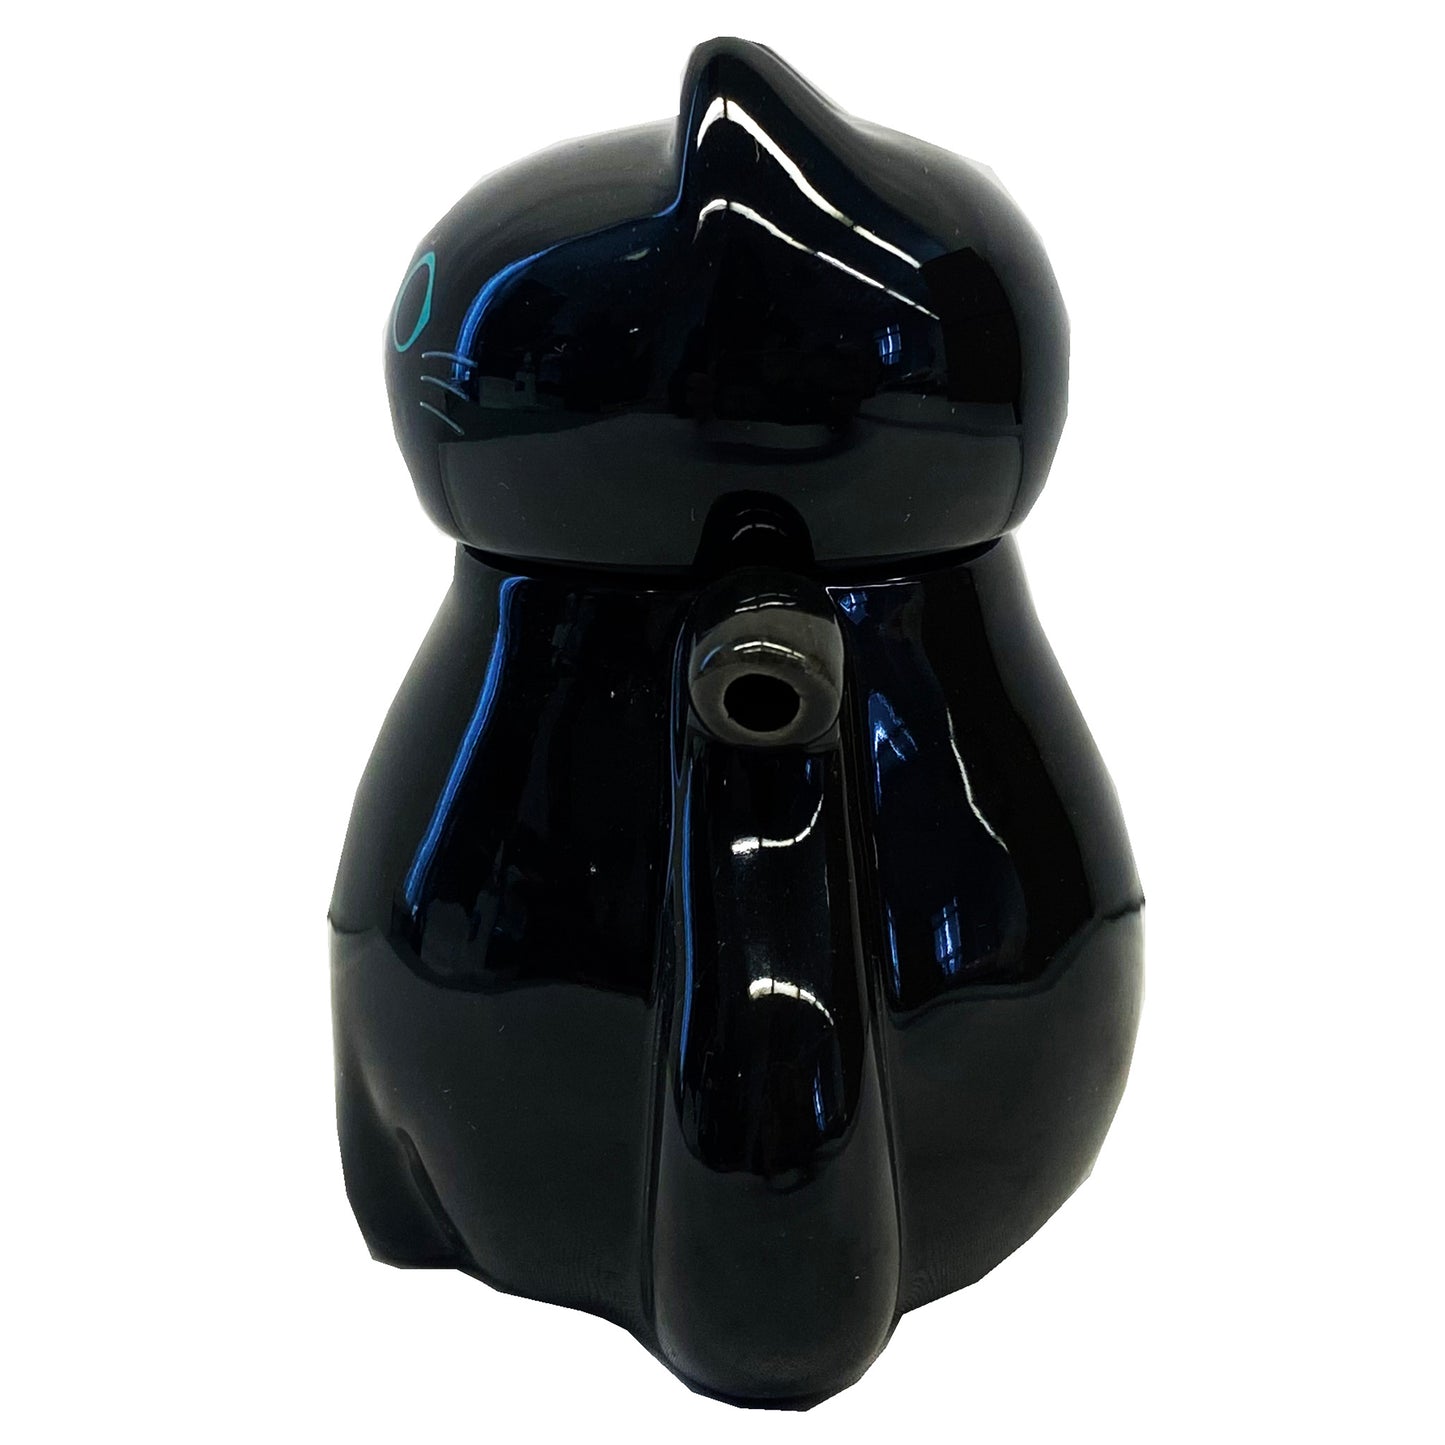 Side graphic view of Genki Cats Porcelain Sauce Dispenser - Black 3.75 Inches 4oz